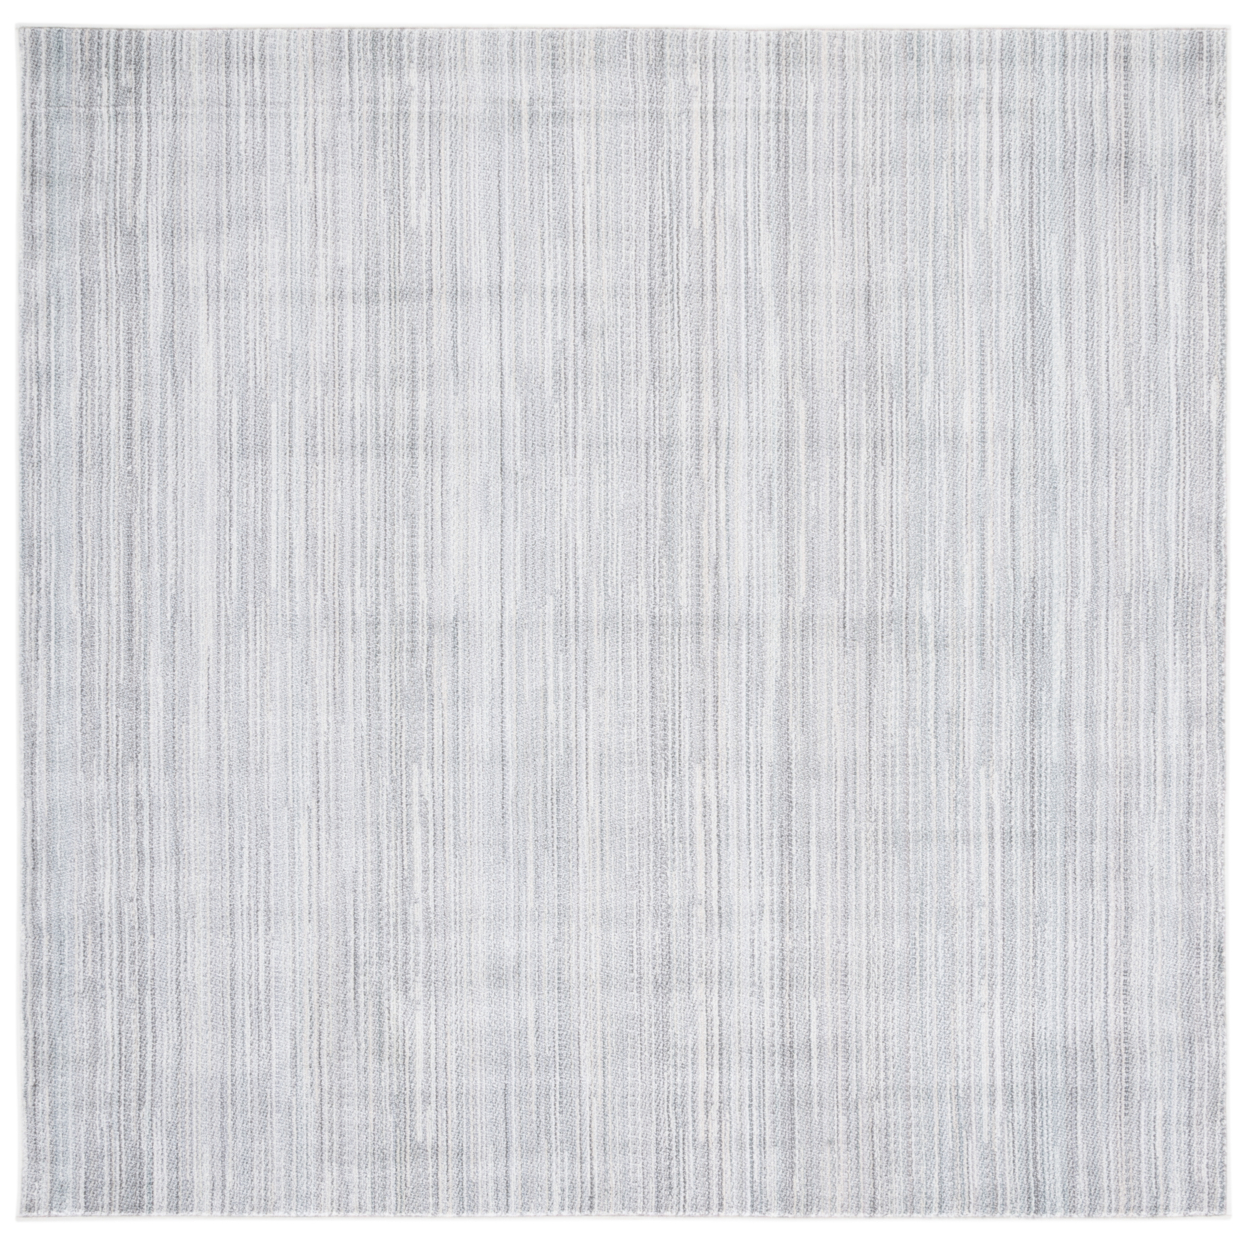 SAFAVIEH Herat Collection HRT313A Ivory / Grey Rug - 6' 7 Square